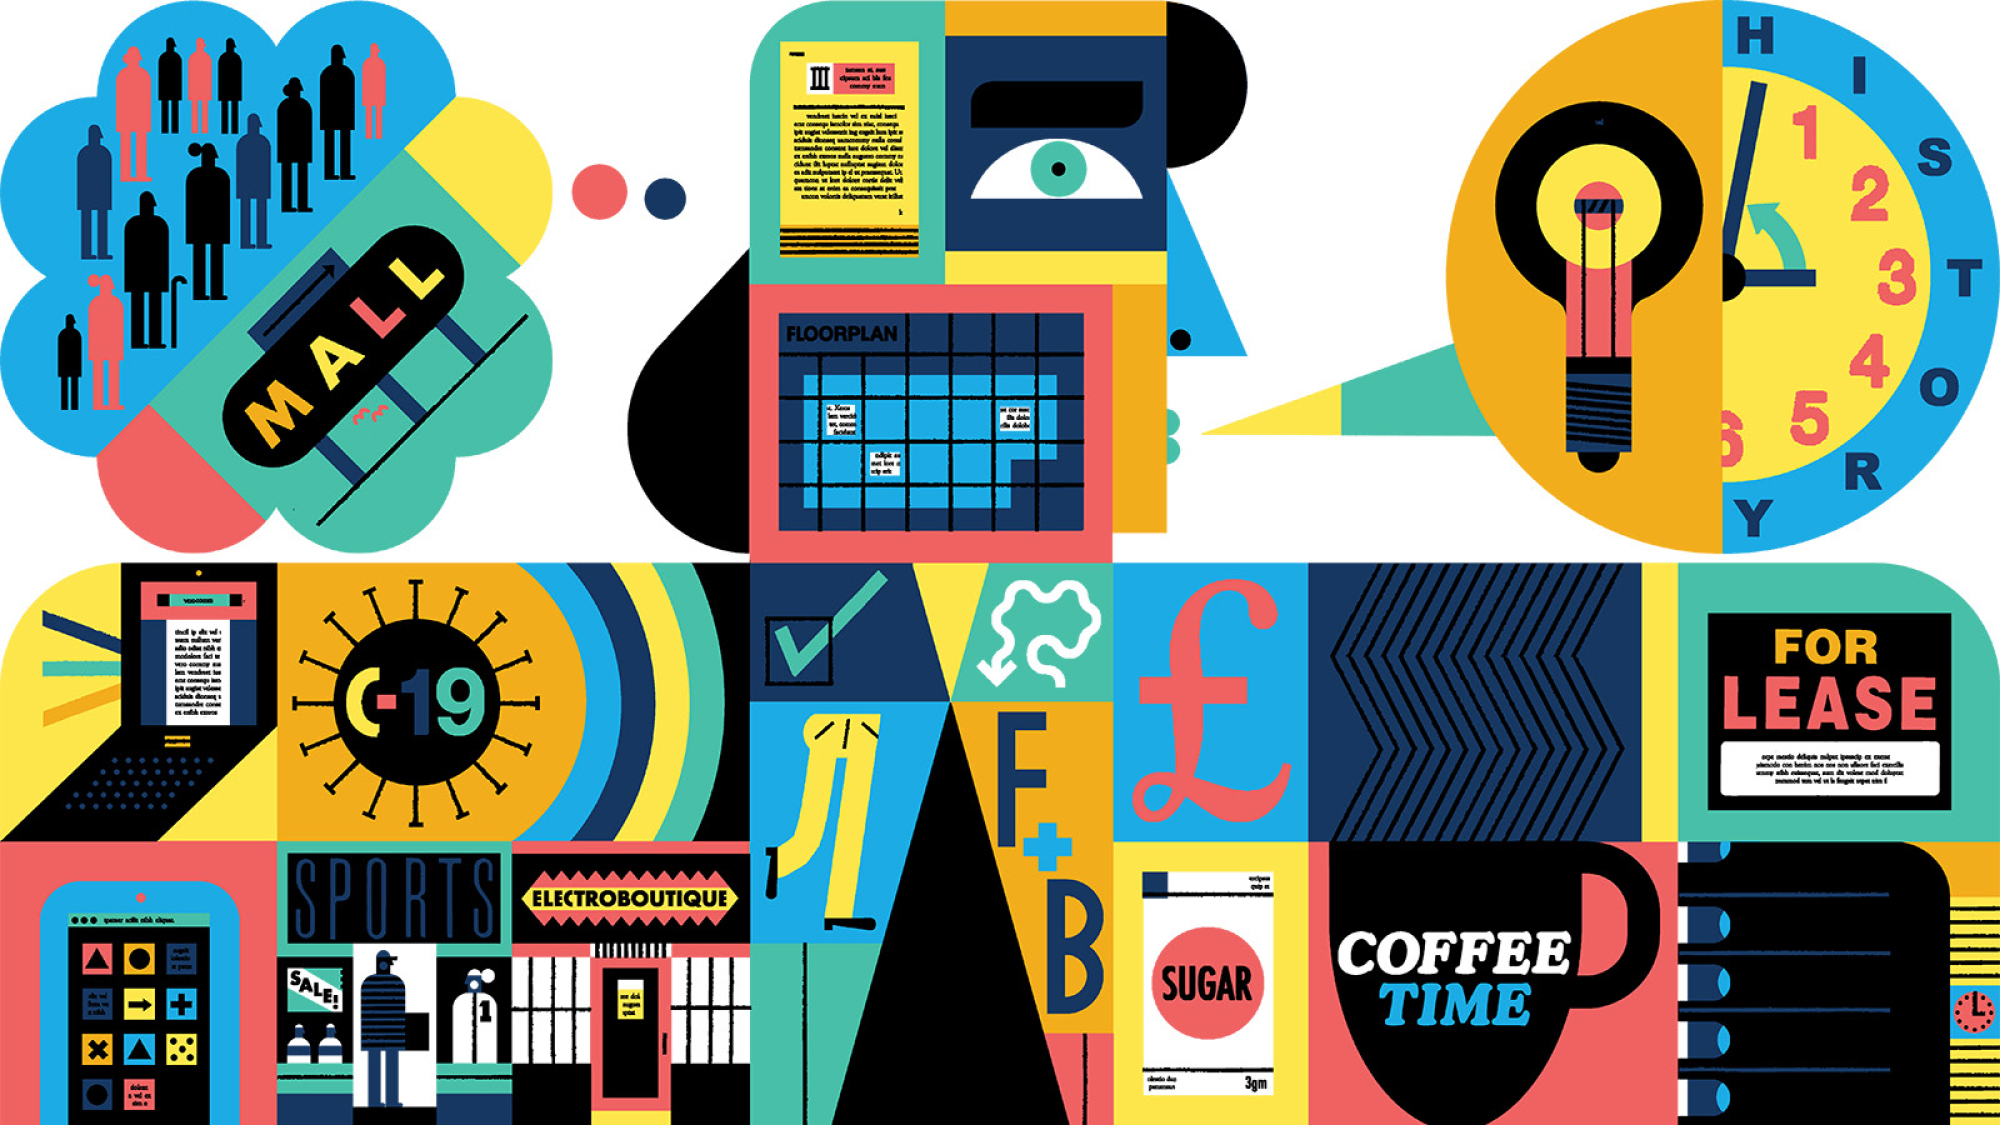 Retail icons illustrated by Raymond Biesinger